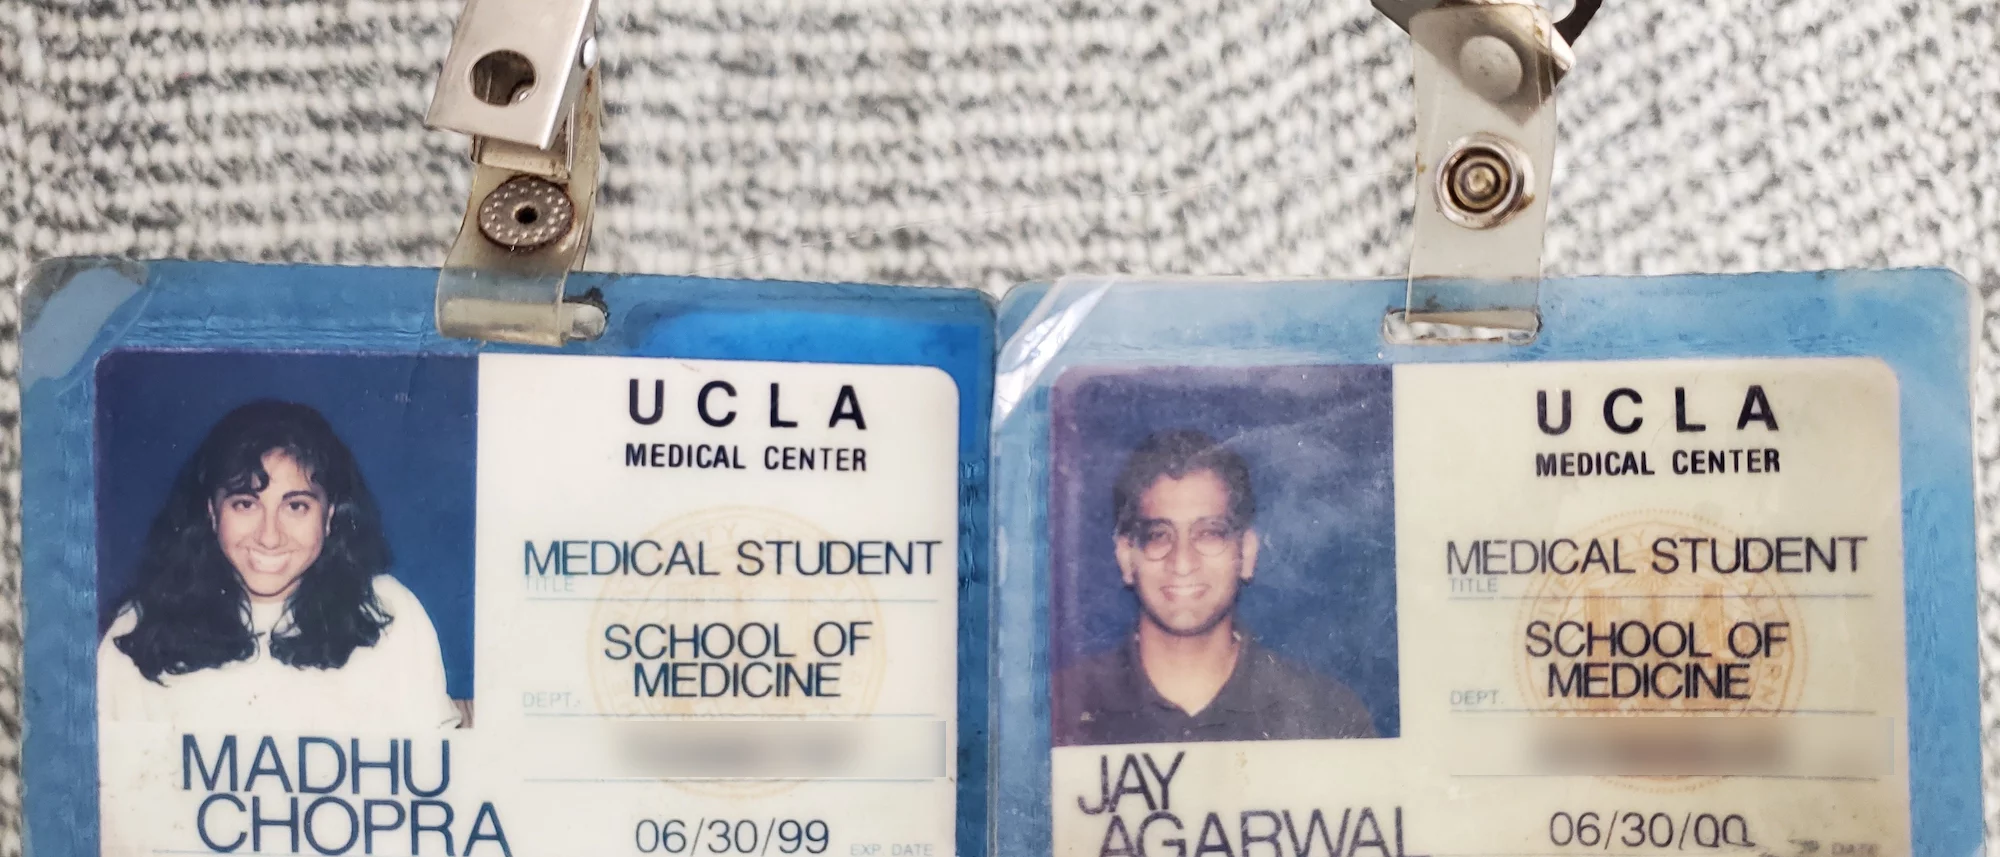 Medical school identification badges for two alumni from 1998